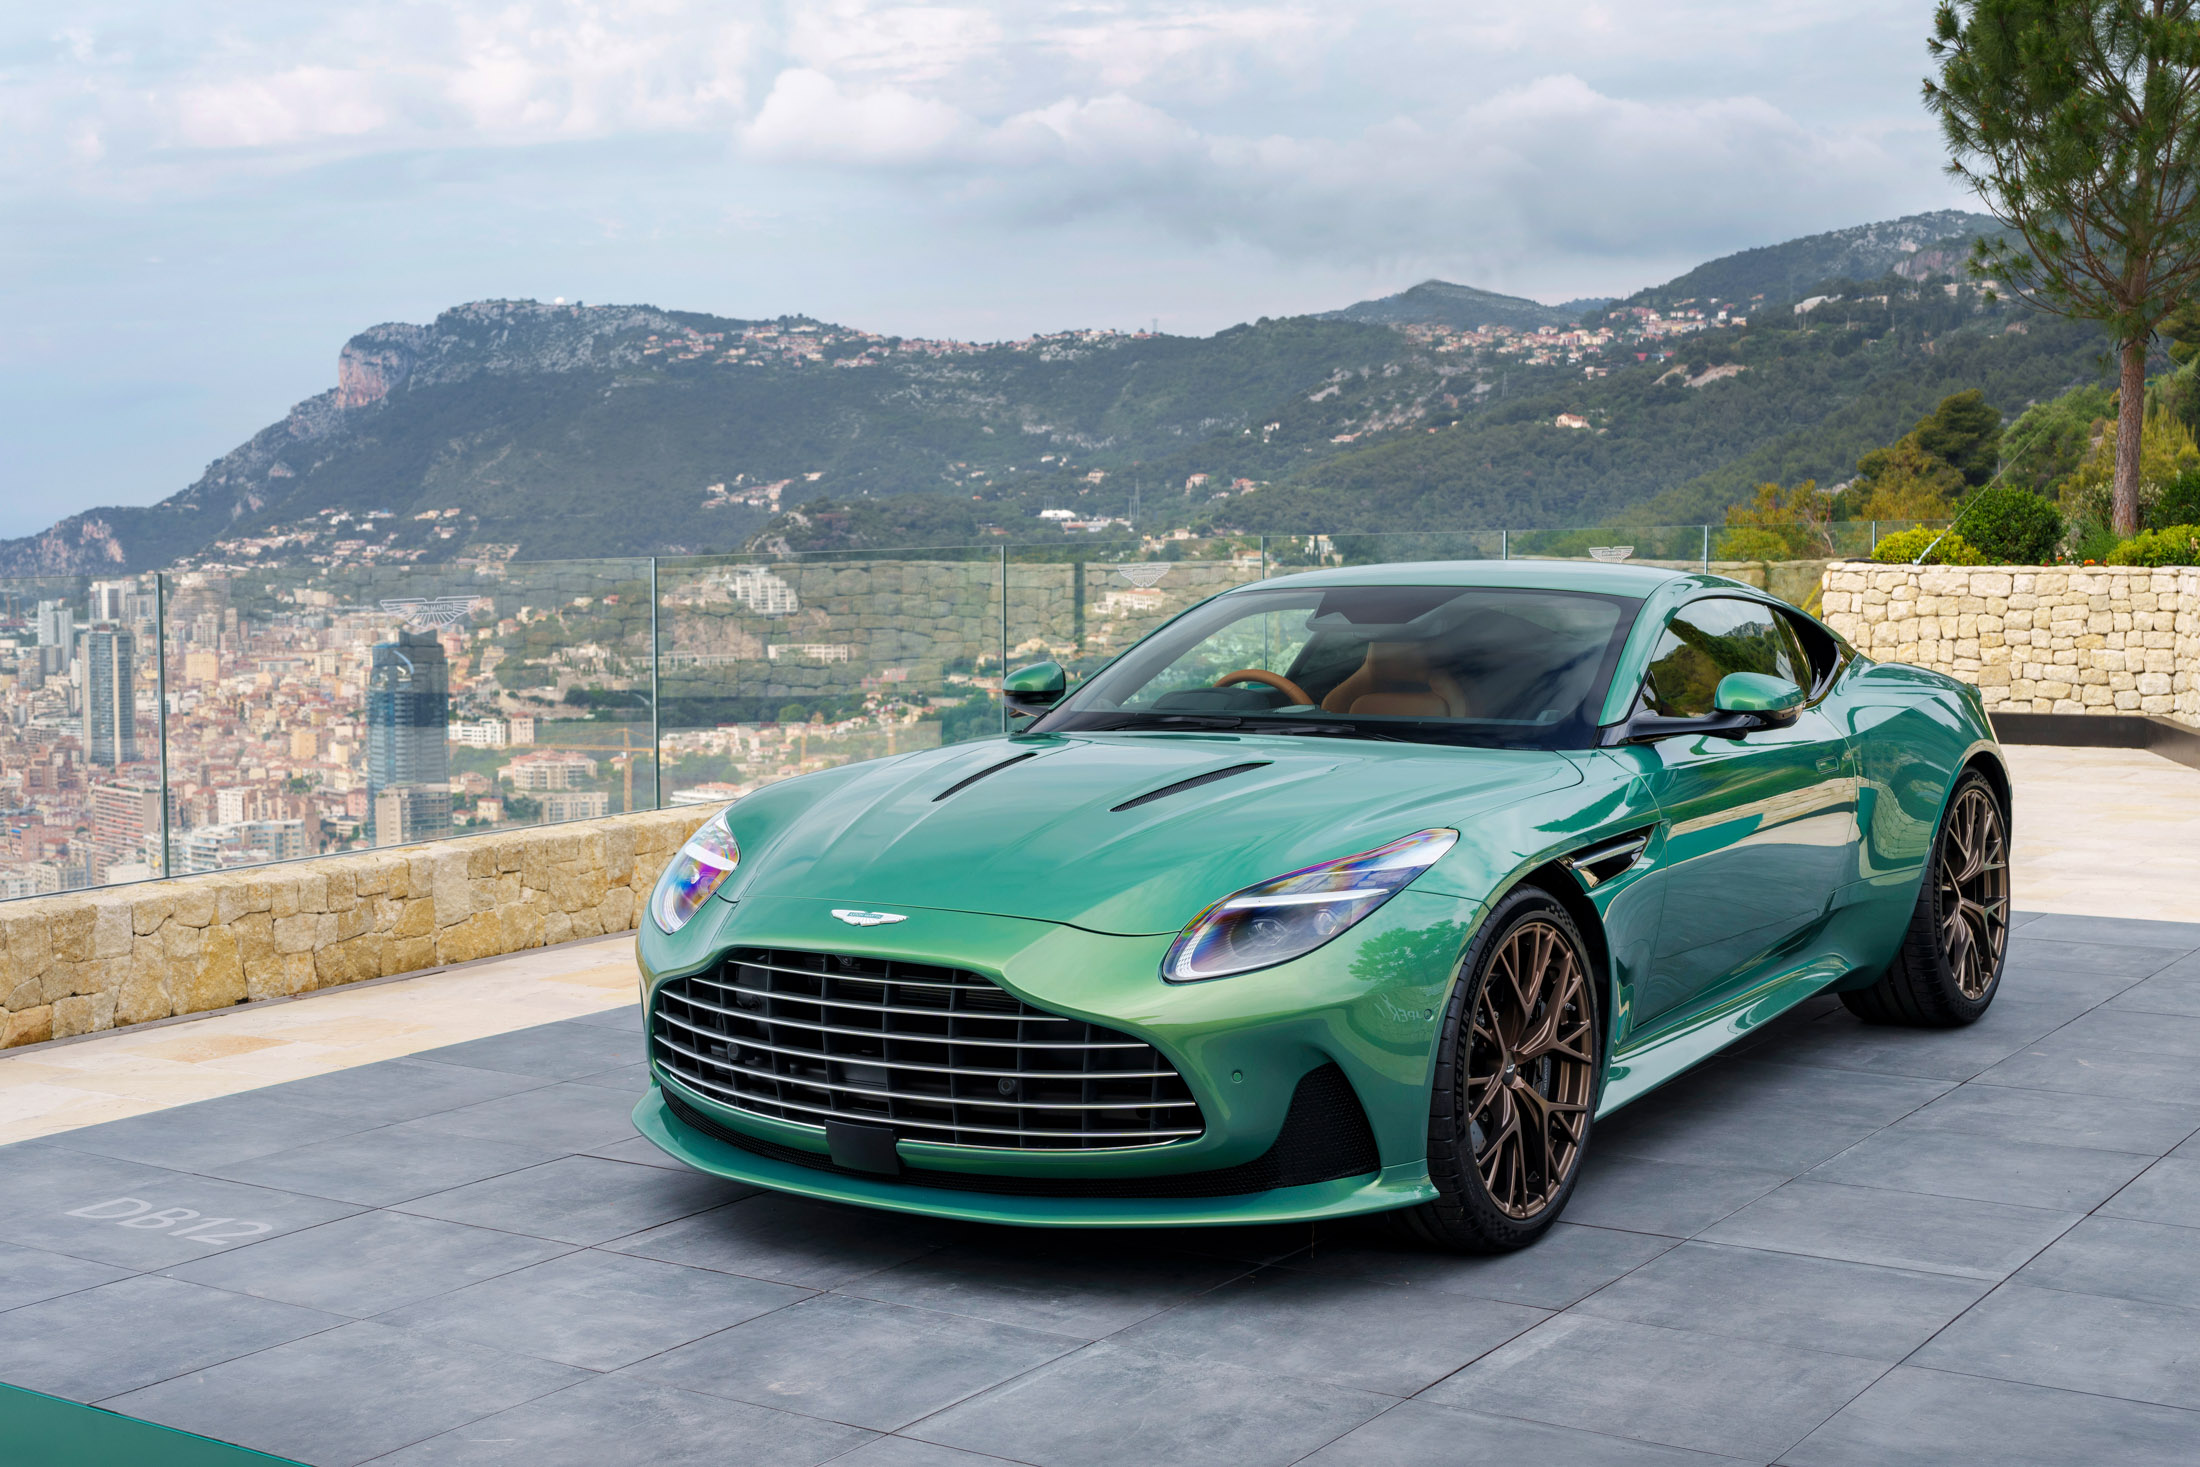 Aston Martin DB12 Review: Test-Driving the $245,000 Coupe in Monte ...